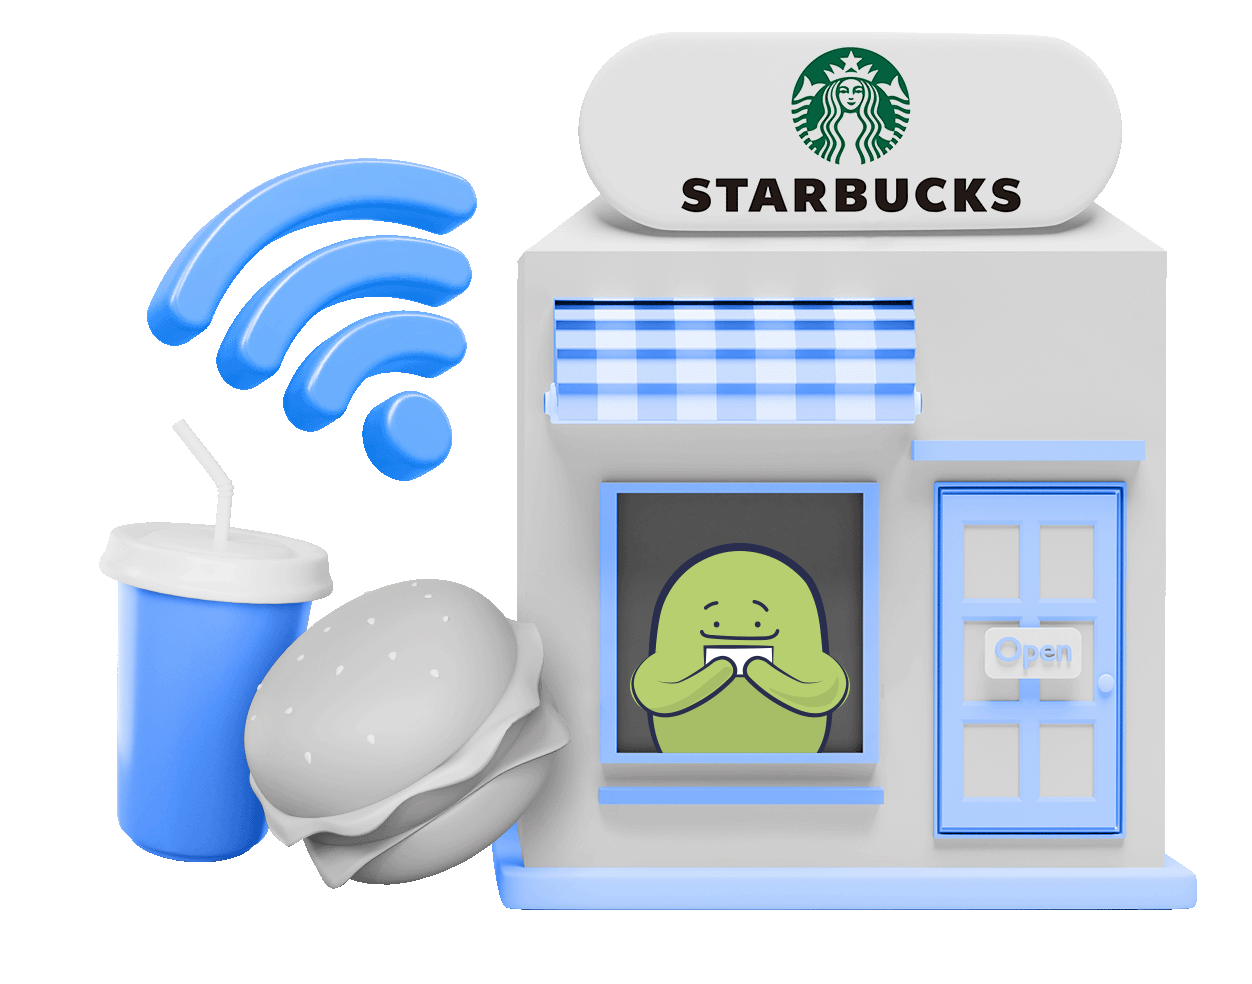 How to connect to Starbucks WiFi more safely